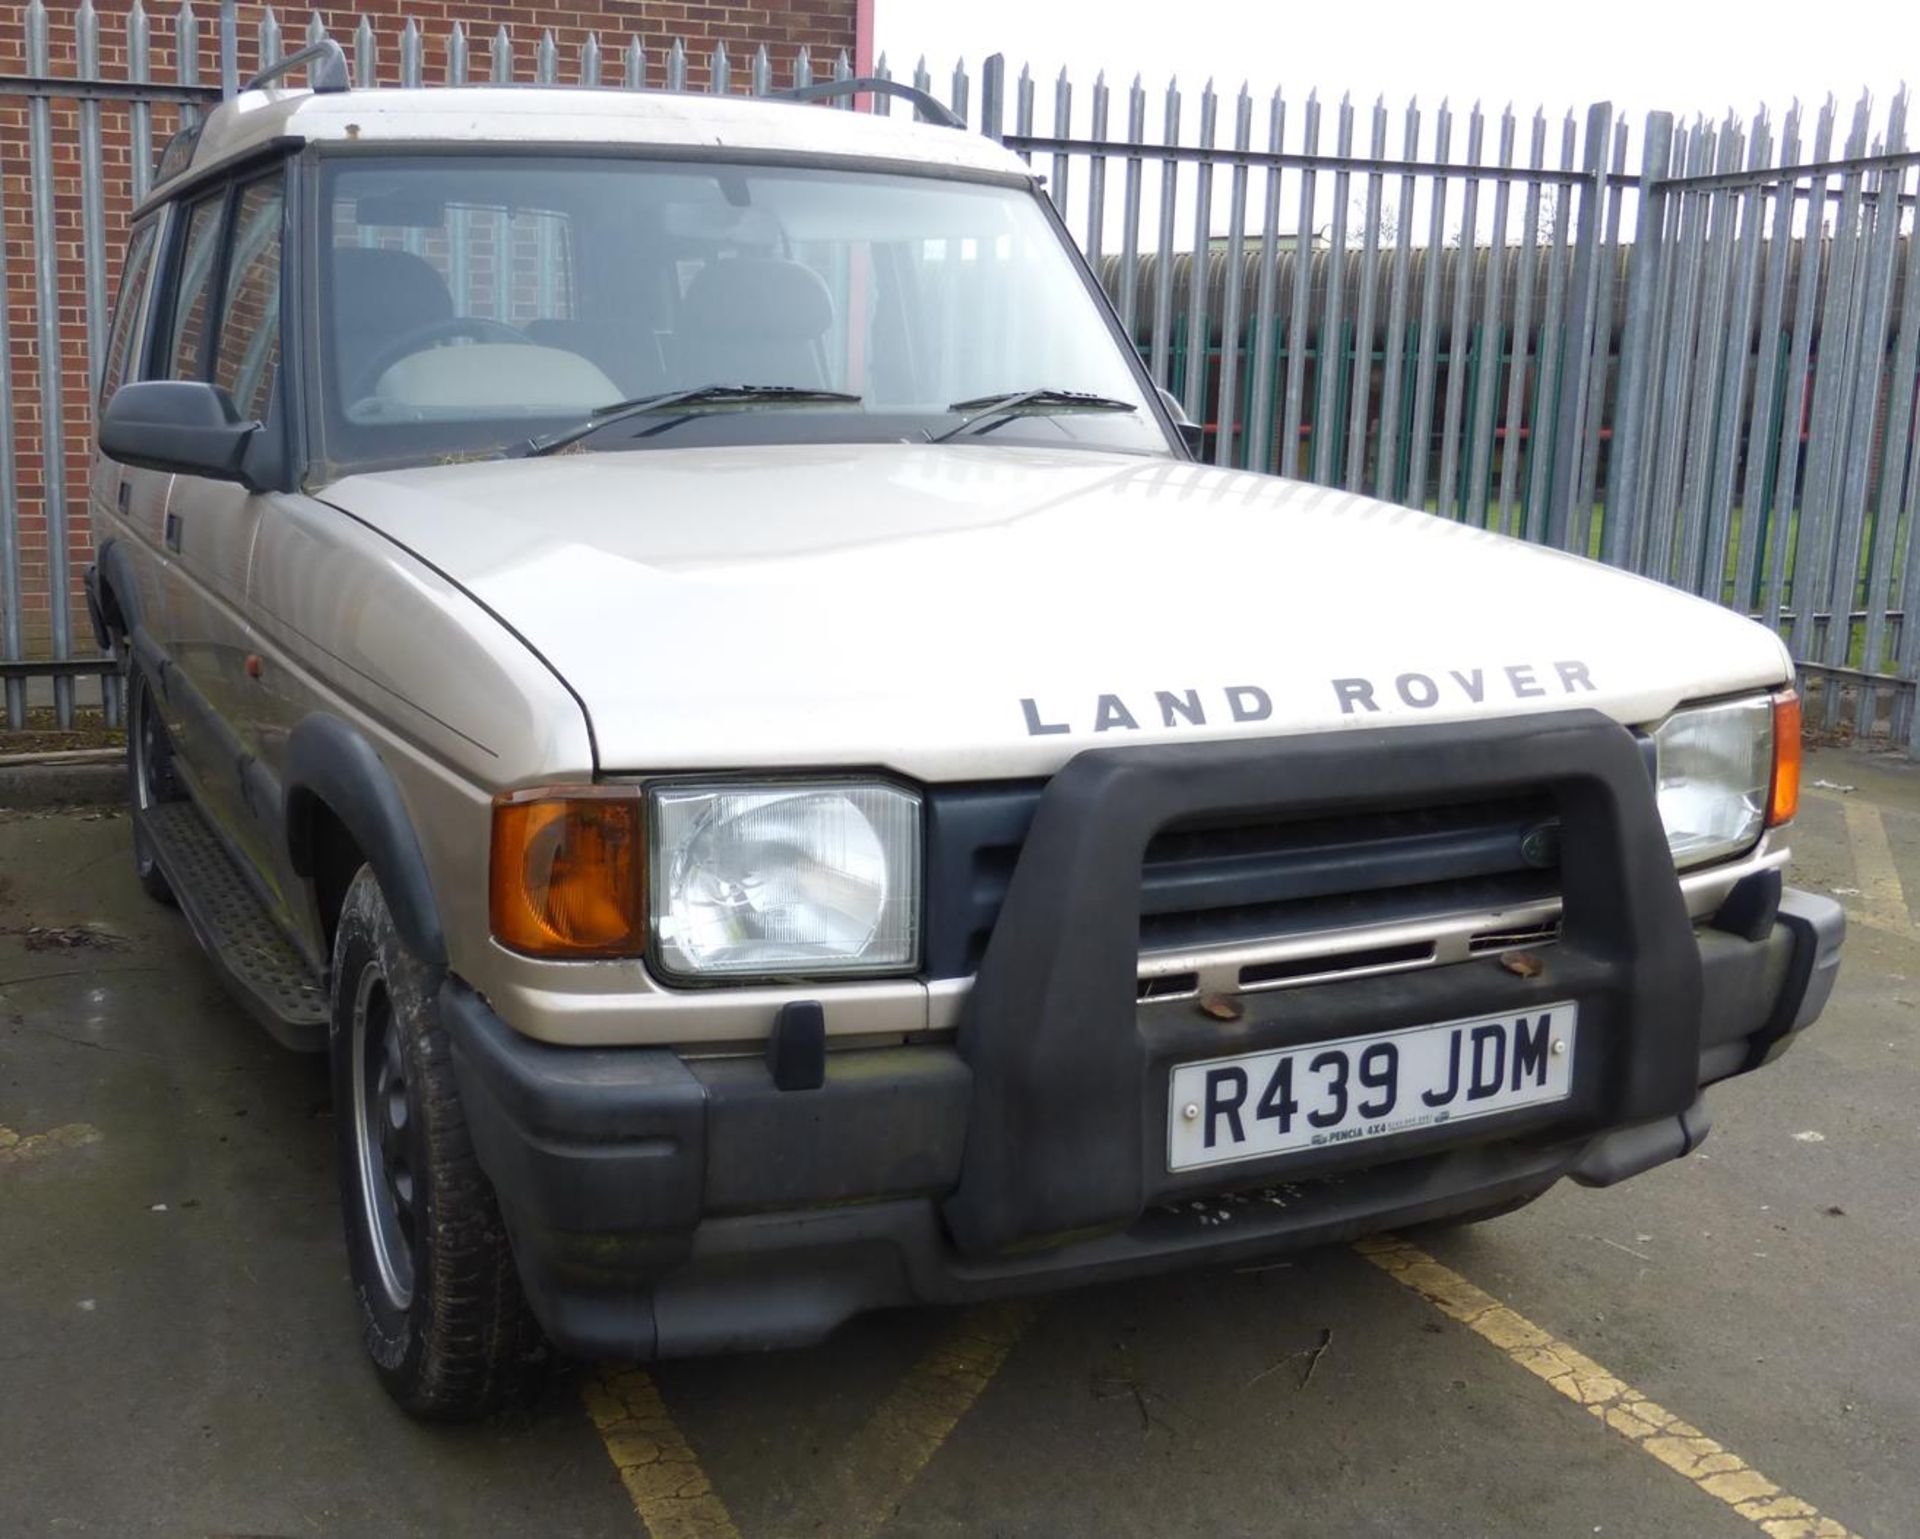 A Land Rover Discovery in Gold 2495cc Diesel Automatic, Date of First Registration March 1998,